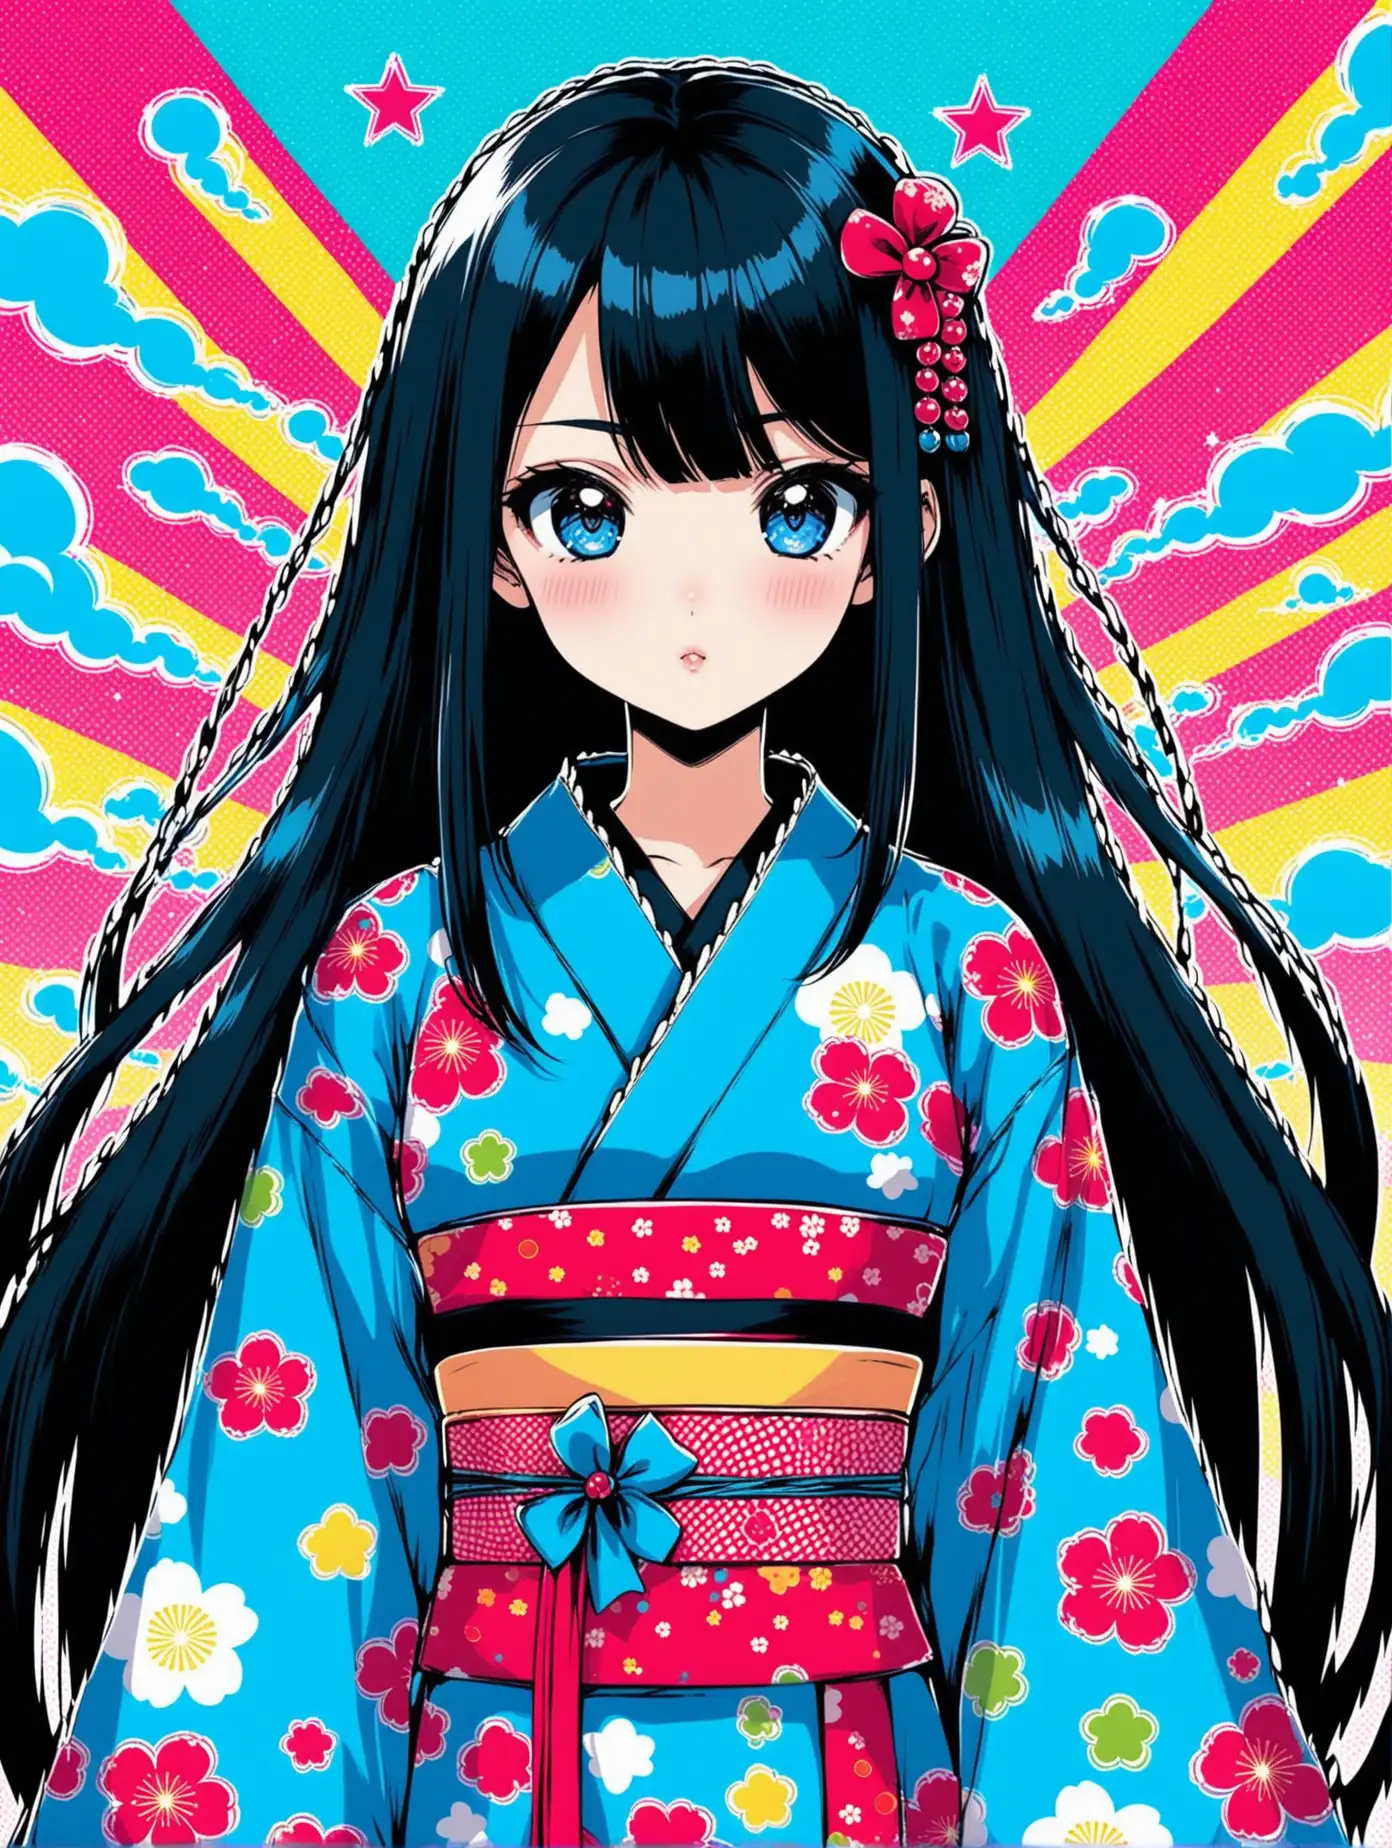 a anime girl with lots of blue and black colors adorned with long black hair in Japanese pop art kawaii